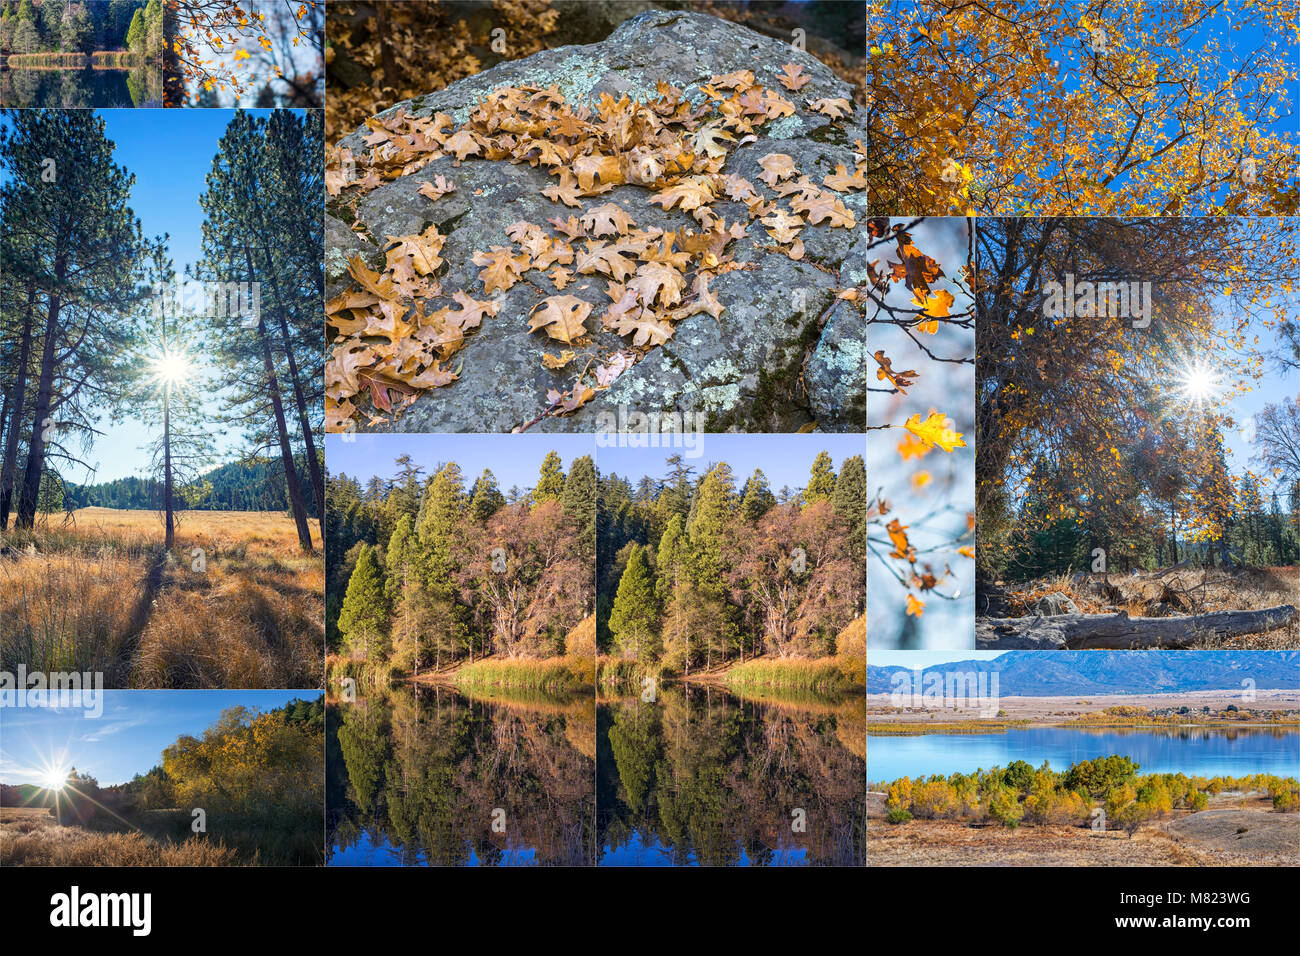 Photo Collage. Autumn season and beauty in nature concept. Stock Photo